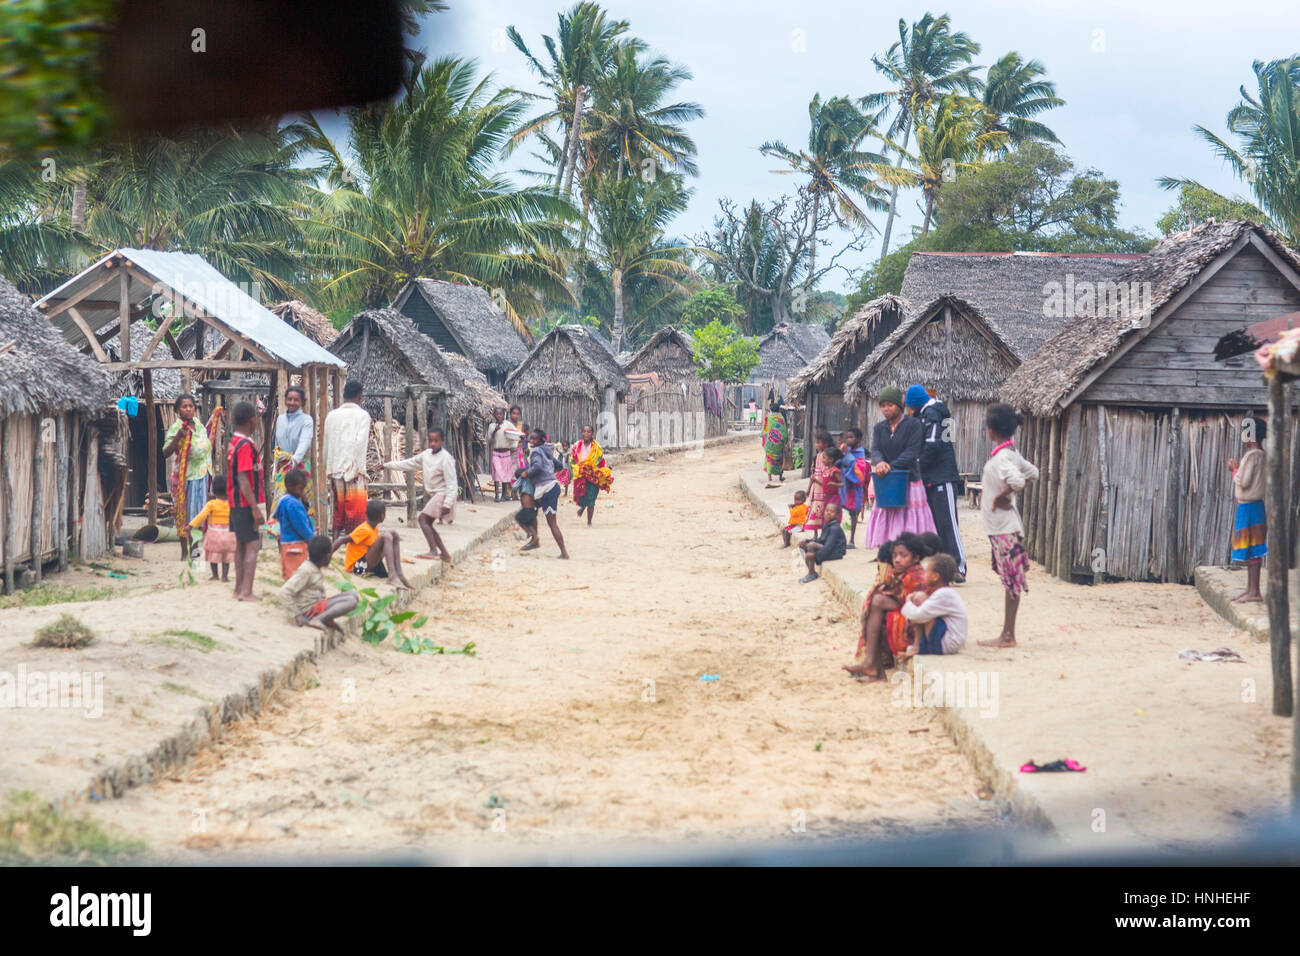 Fisherman's community along the coast in Fort-Dauphin area. People live here in small wooden shacks in extreme poverty with no electricity. Stock Photo